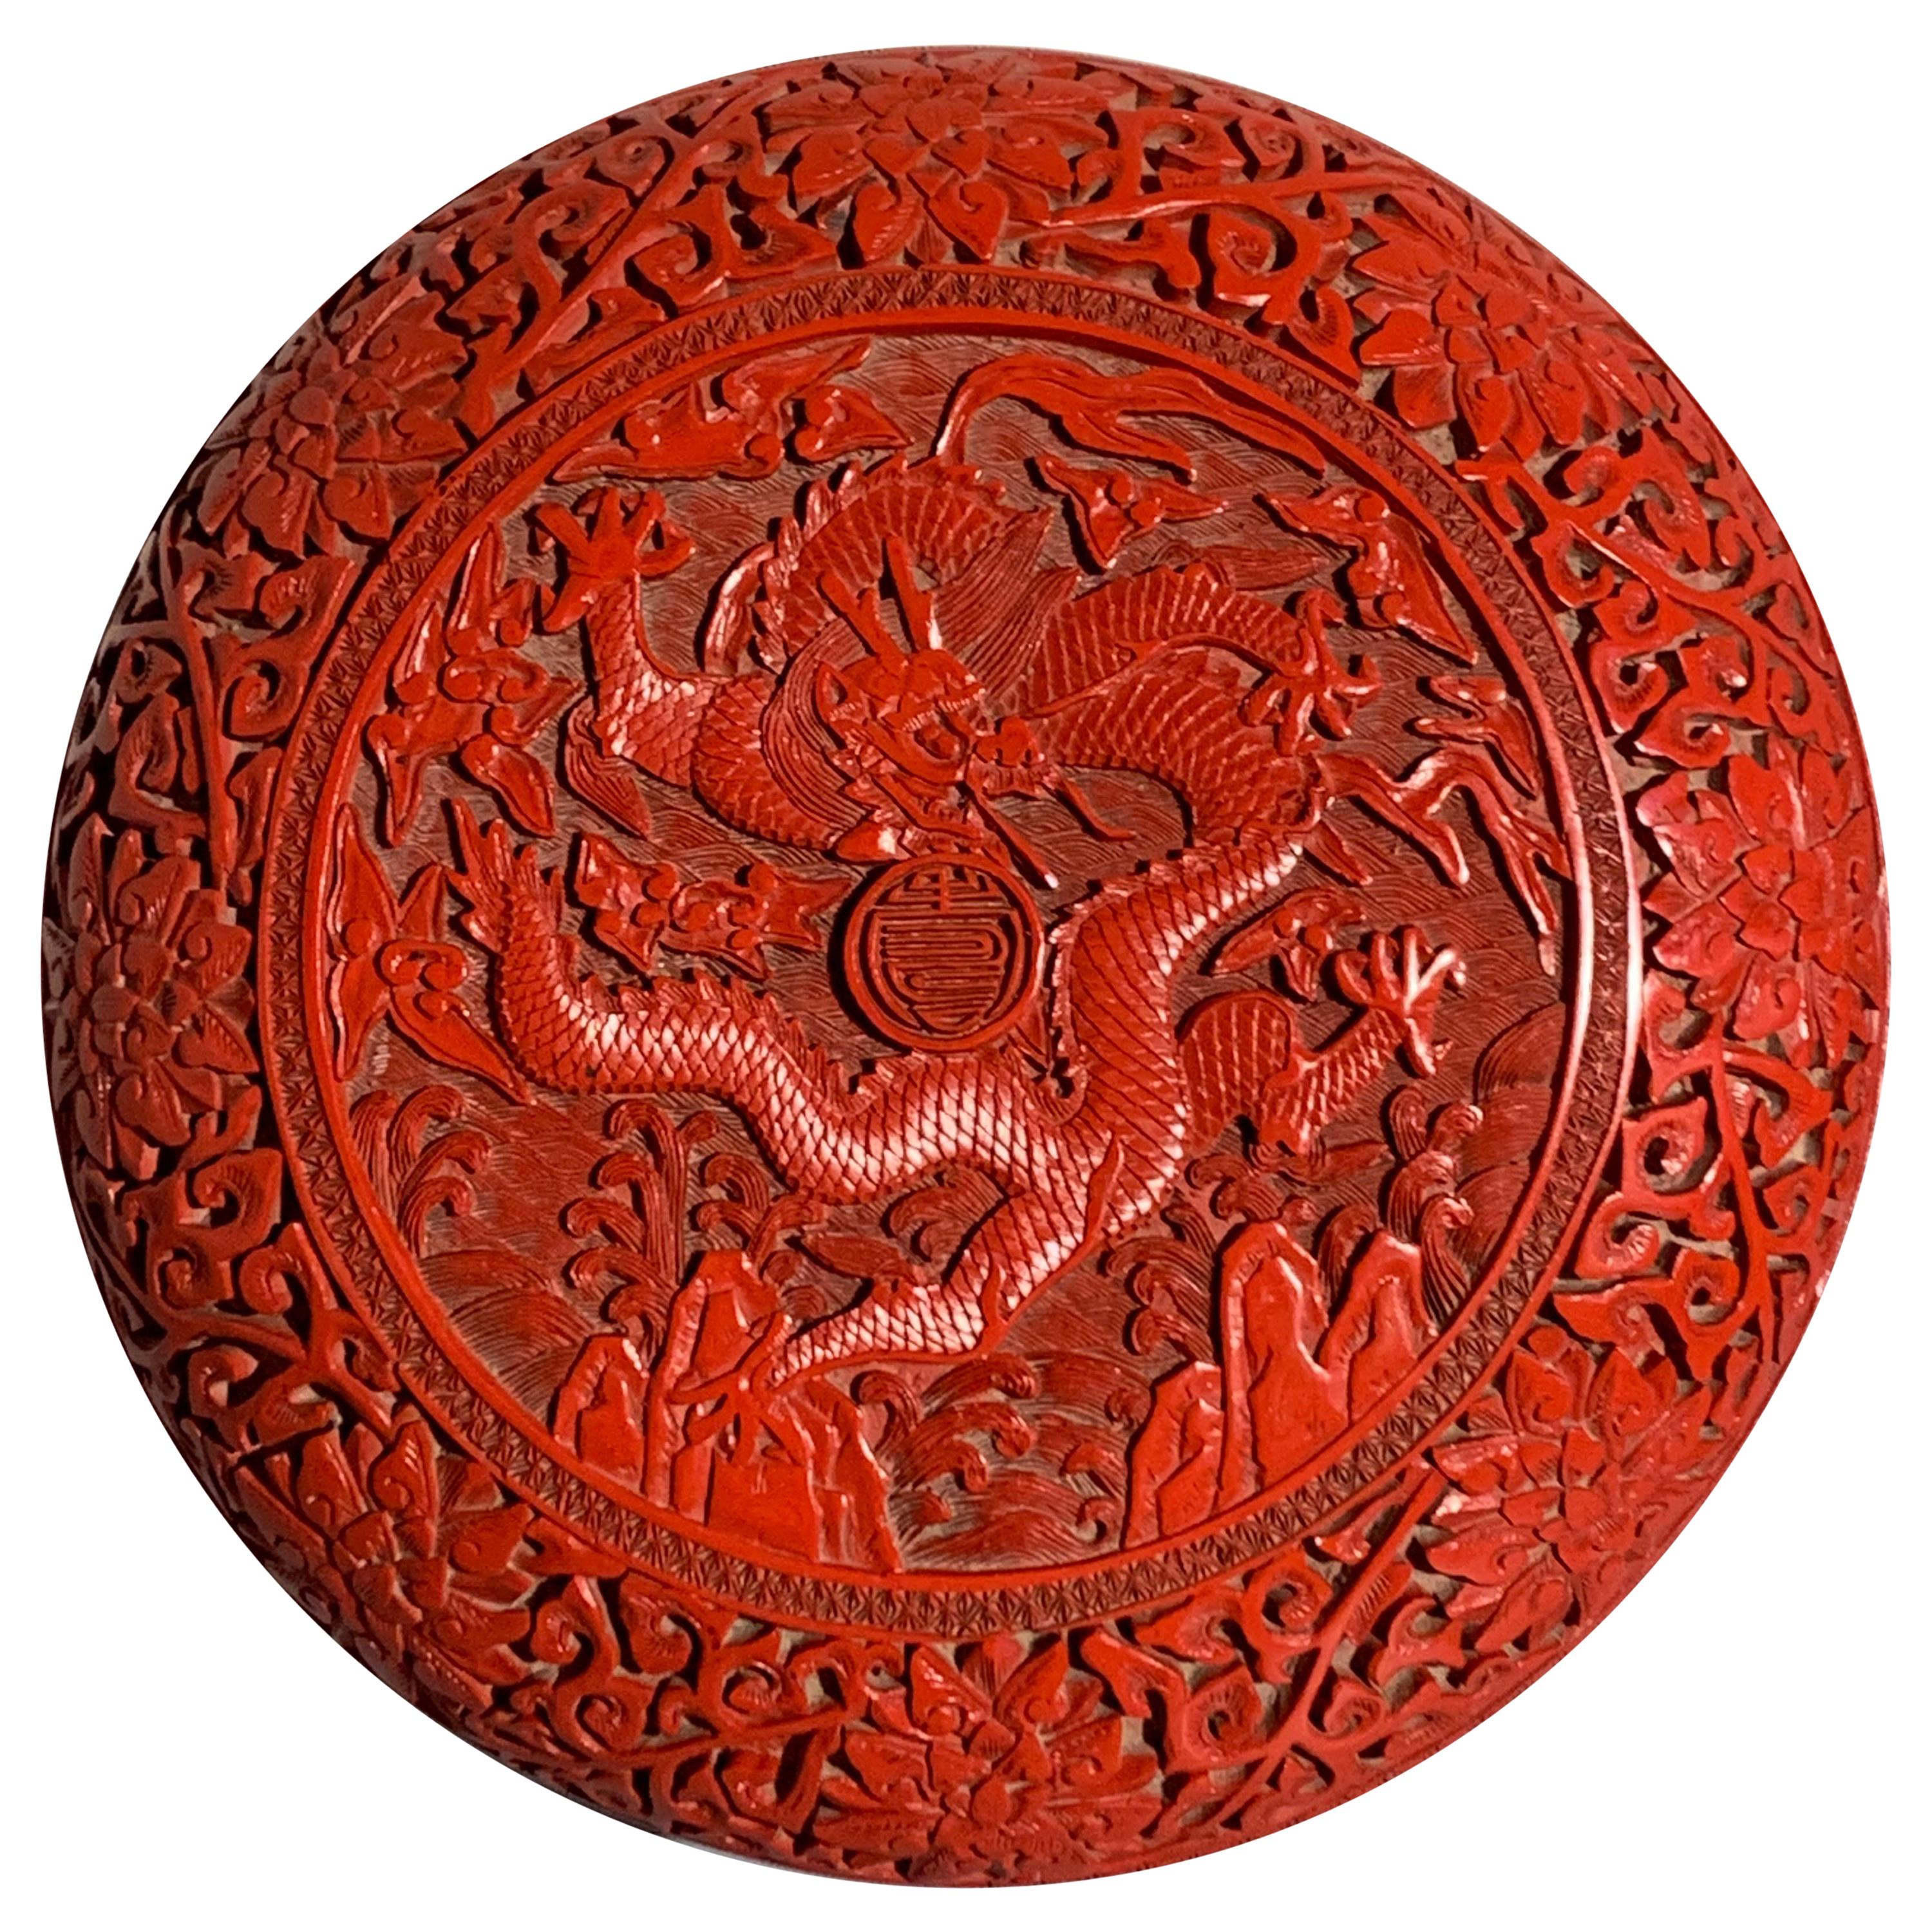 Chinese Carved Cinnabar Red Lacquer Round Dragon Box, Republic Period